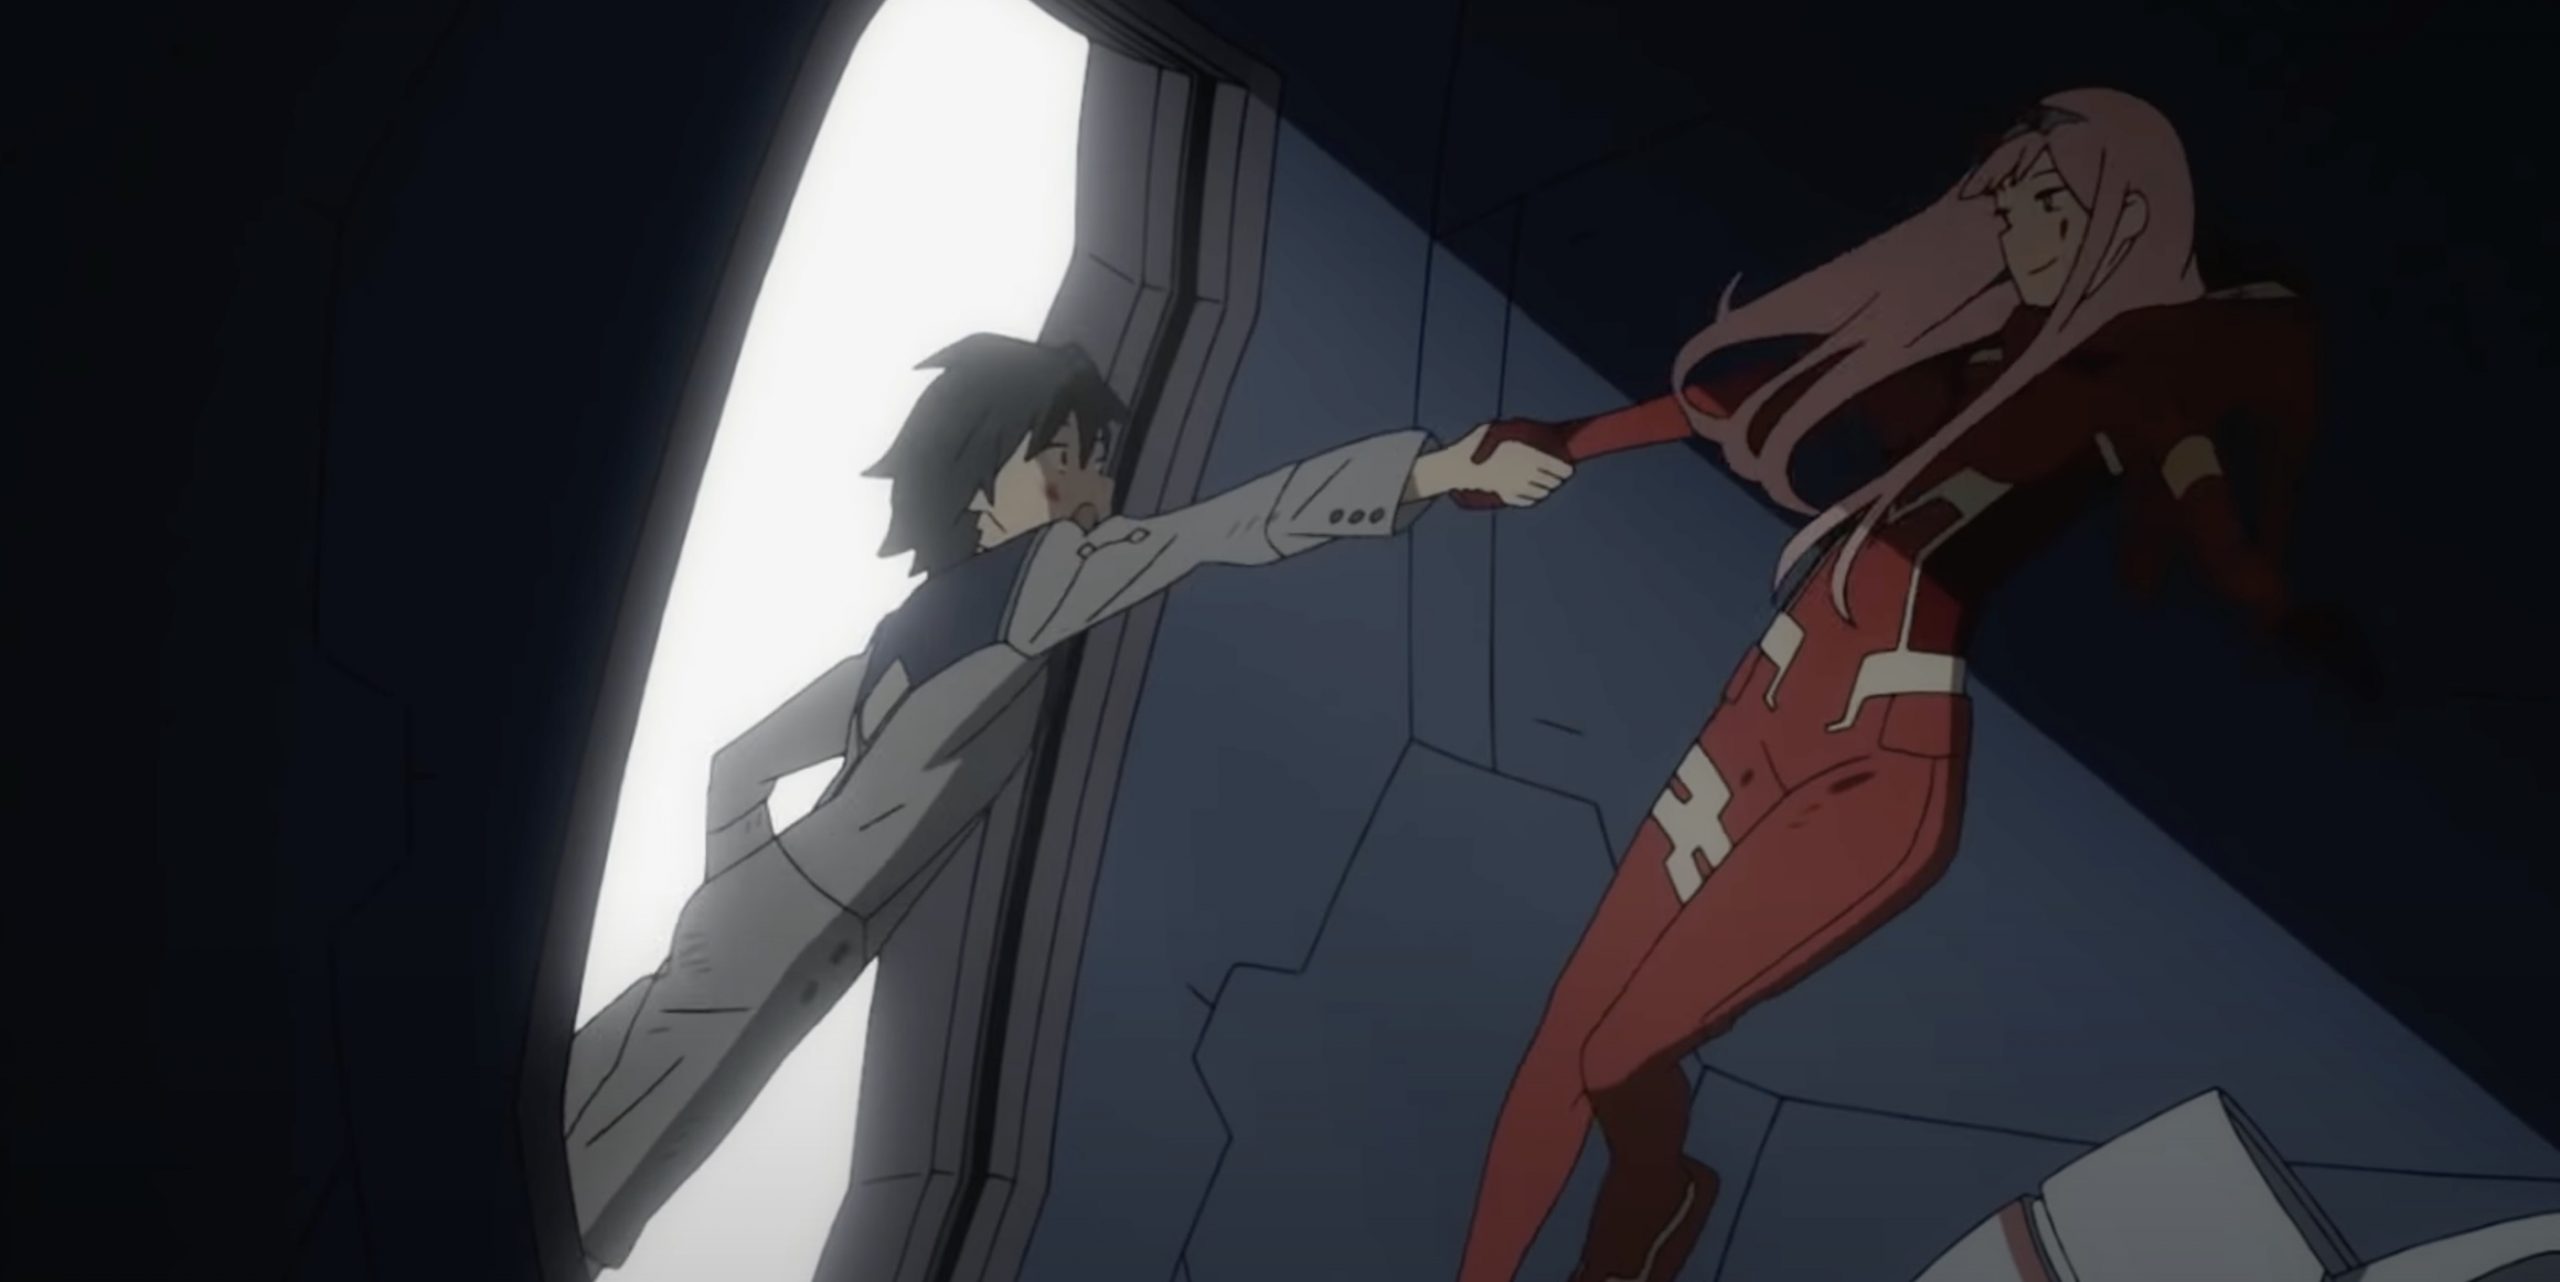 Why Darling in the Franxx Is So Hated? Explained